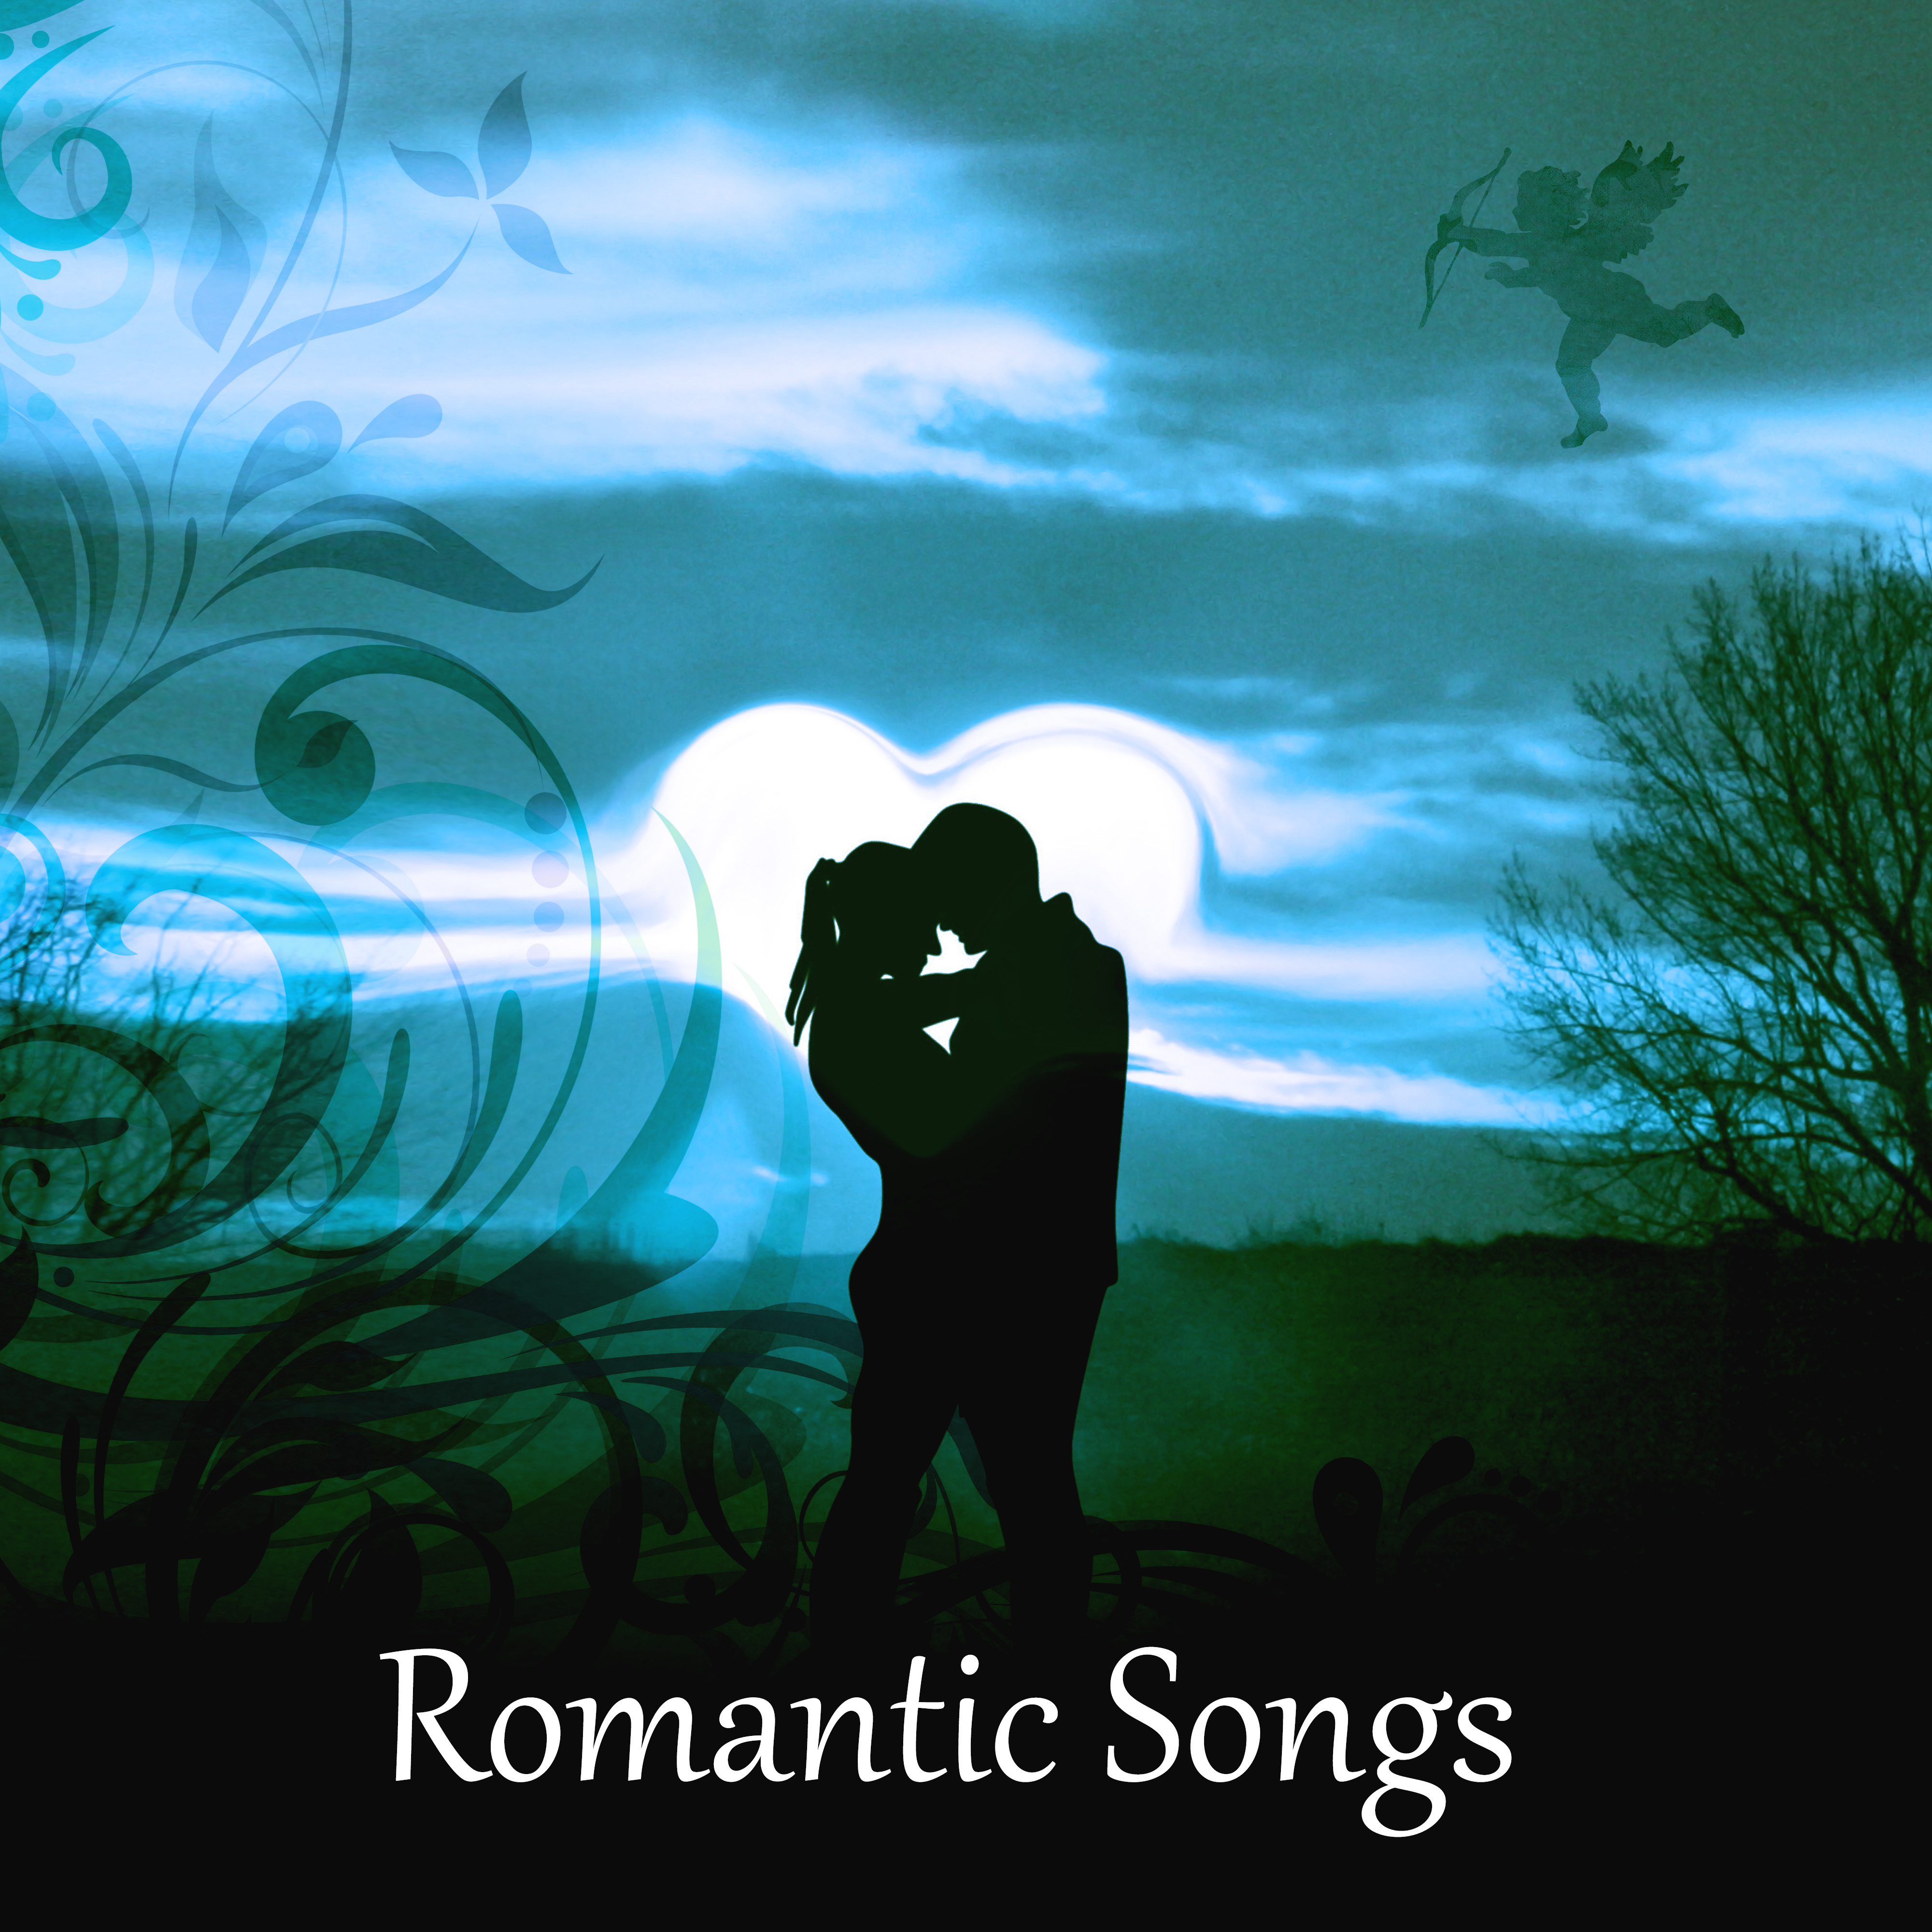 Romantic Songs -  Relaxing Jazz Music Bar and Lounge Mood Music Cafe, Full Moon, Candle Light Dinner Music, Instrumental Music, Piano Jazz